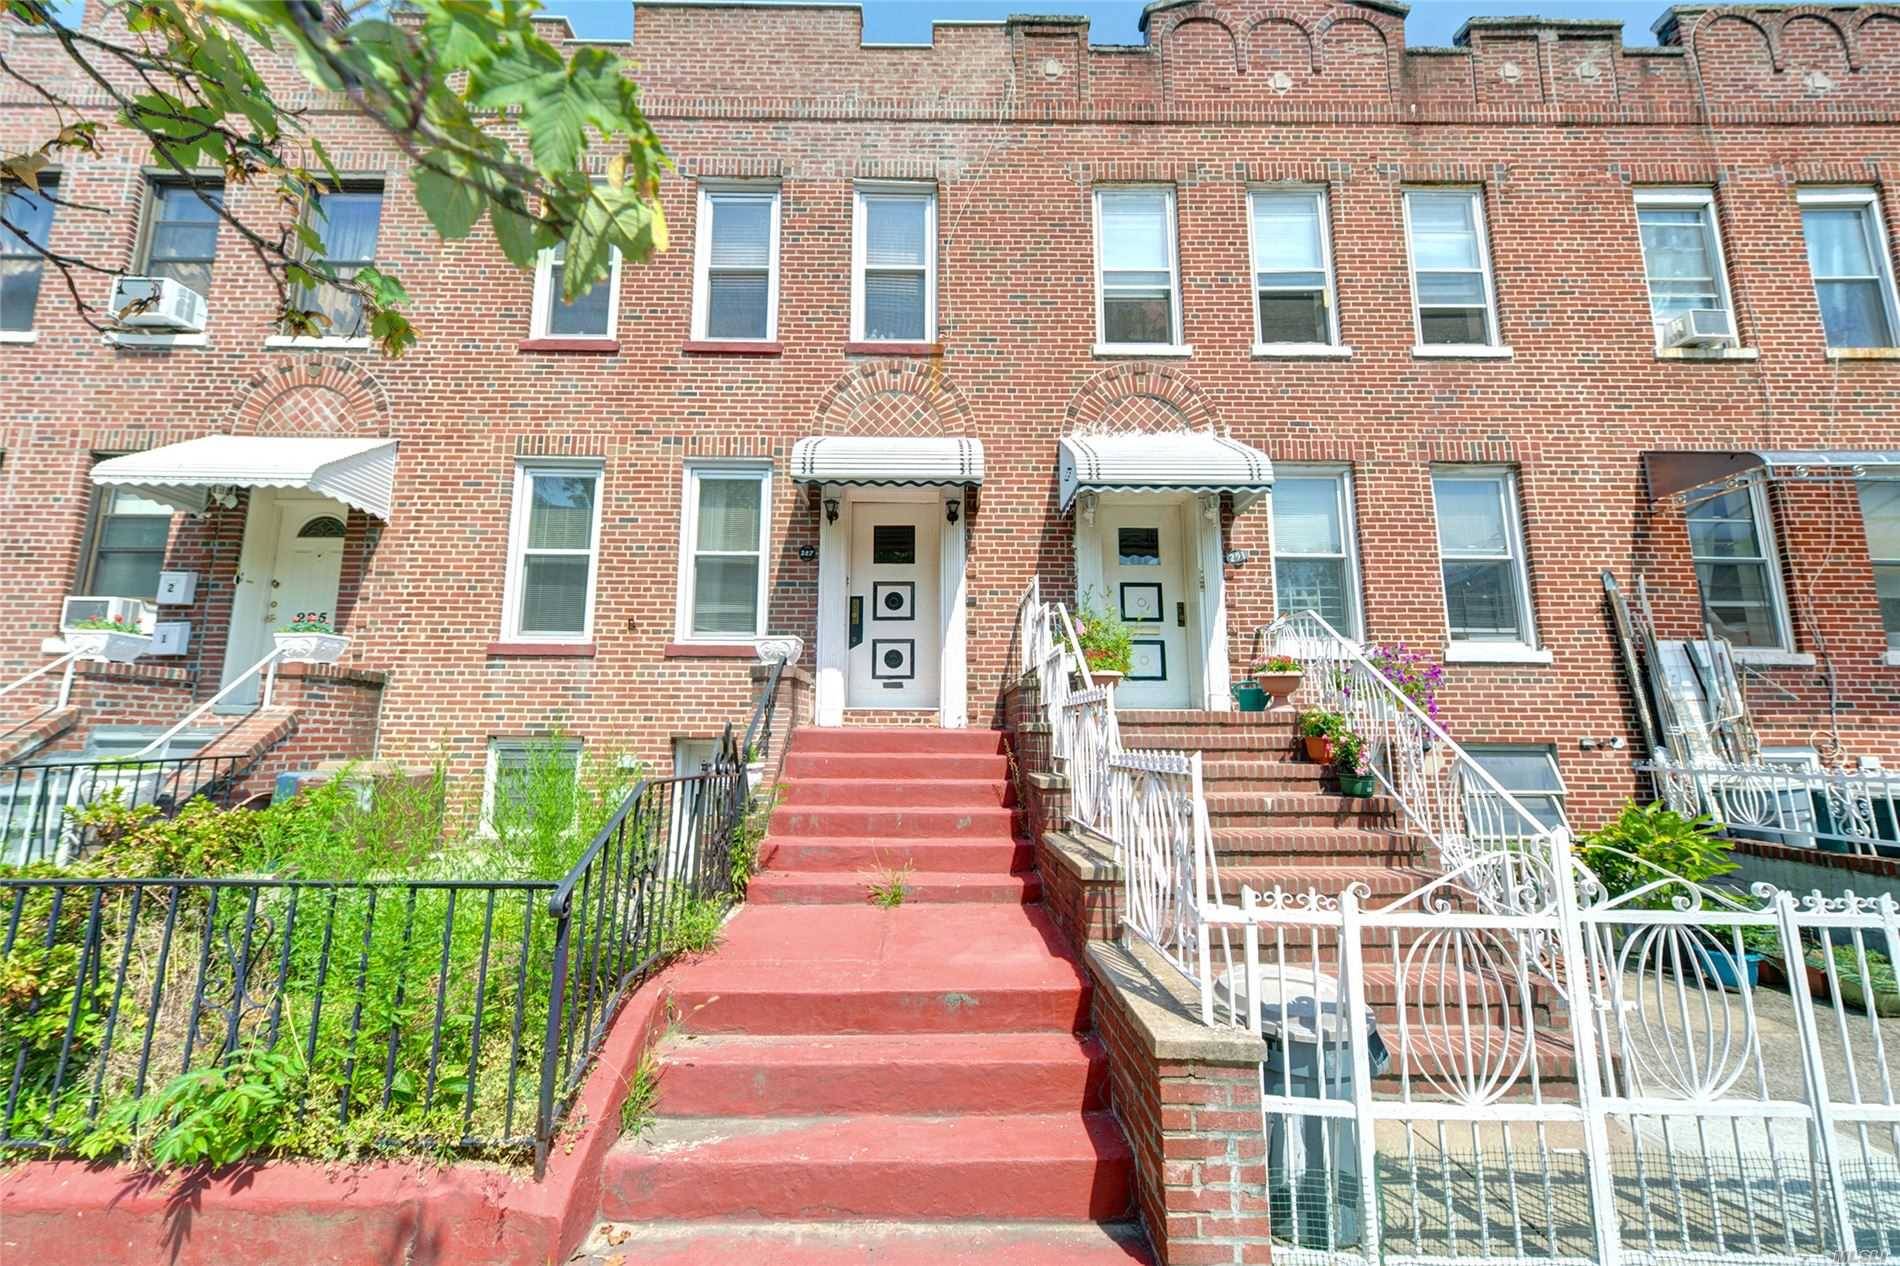 All Brick Attached 2 Family For Sale Featuring Spacious 2BR Apartments On Each Floor Plus Full Finished Basement And 2 Car Attached Garage !